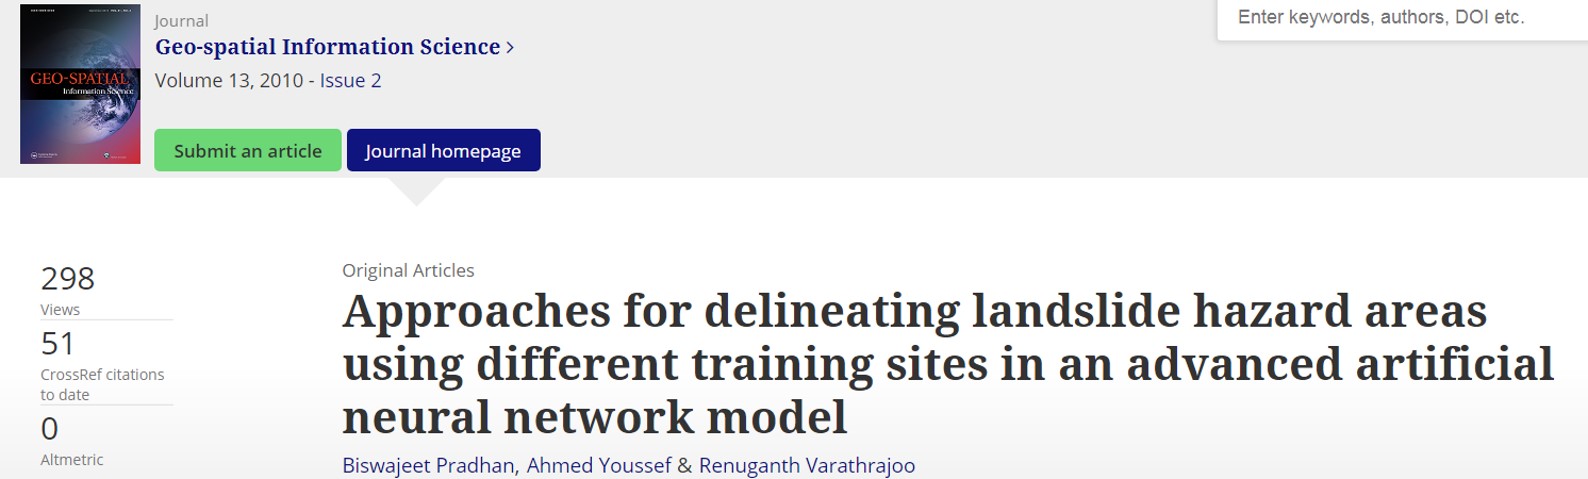 Approaches for delineating landslide hazard areas using different training sites in an advanced artificial neural network model